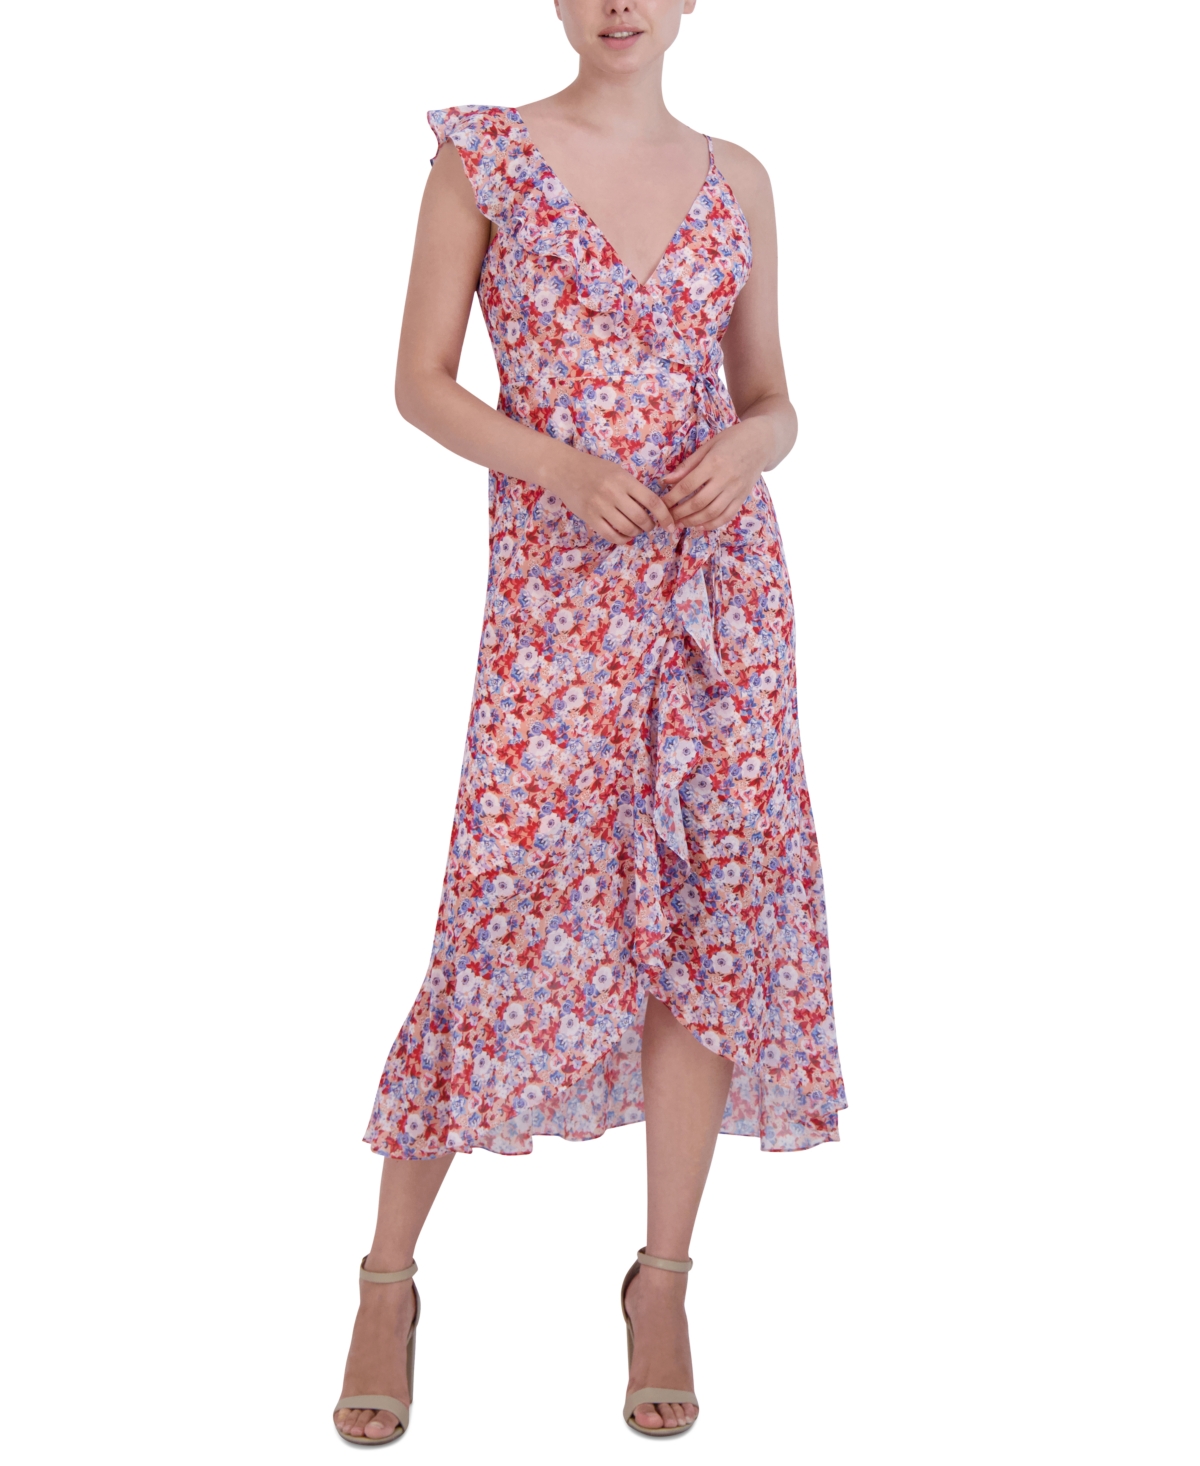 Women's Printed Hi-Low Ruffled Faux-Wrap Dress - Painterly Floral